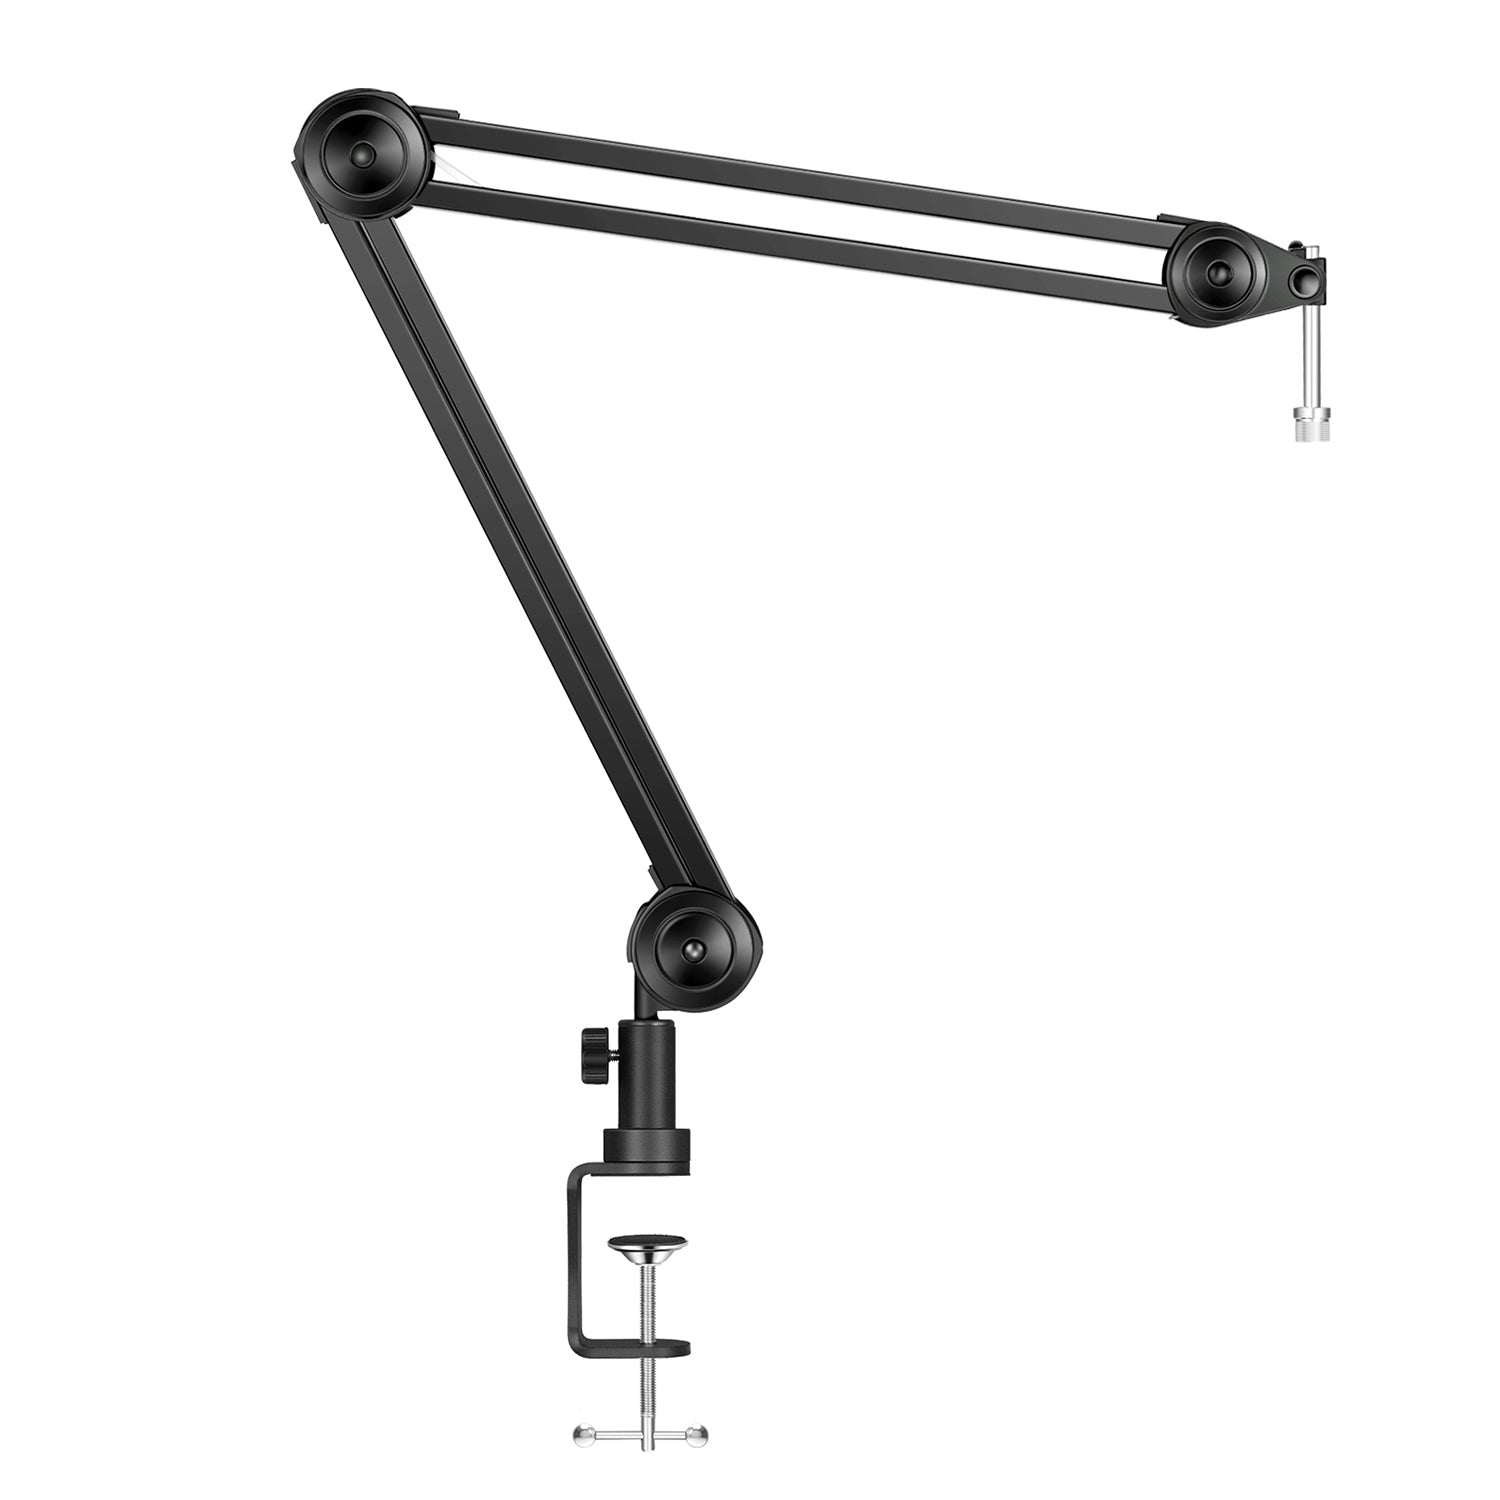 NEEWER Microphone Arm Stand, Heavy-Duty Mic Arm Microphone Stand Suspe